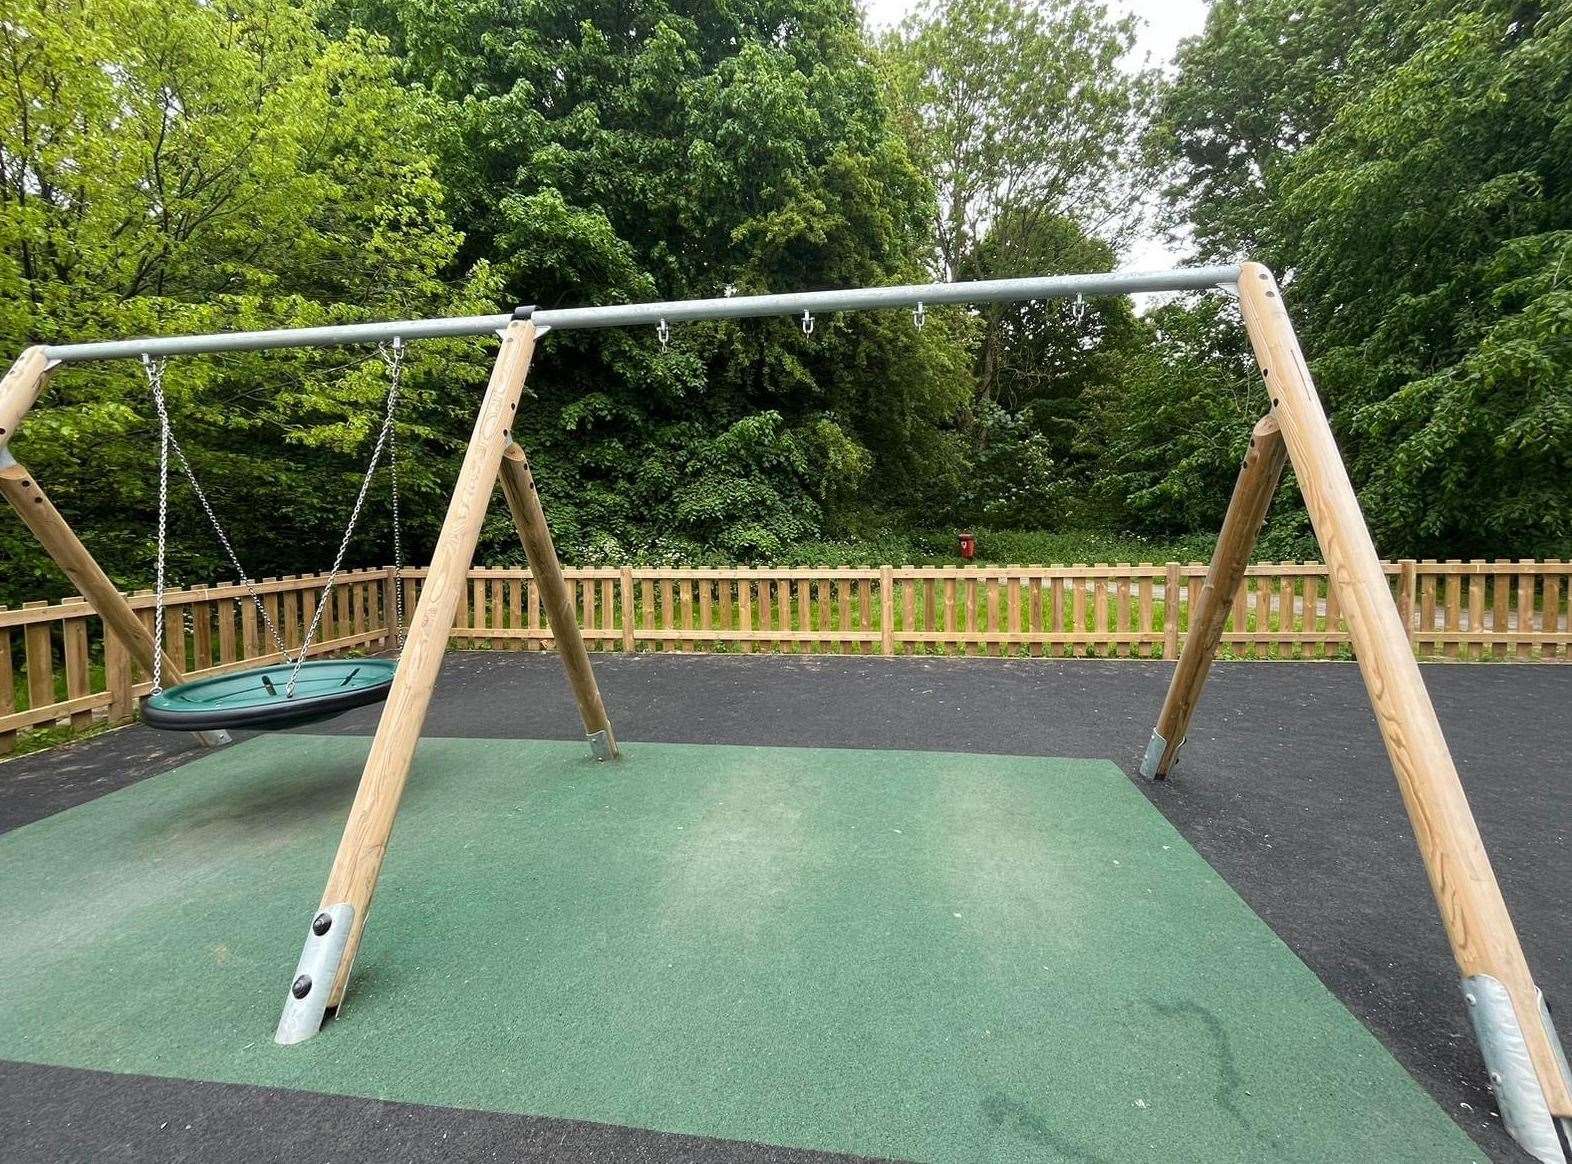 Half of the swing set is now completely missing. Picture: Facebook